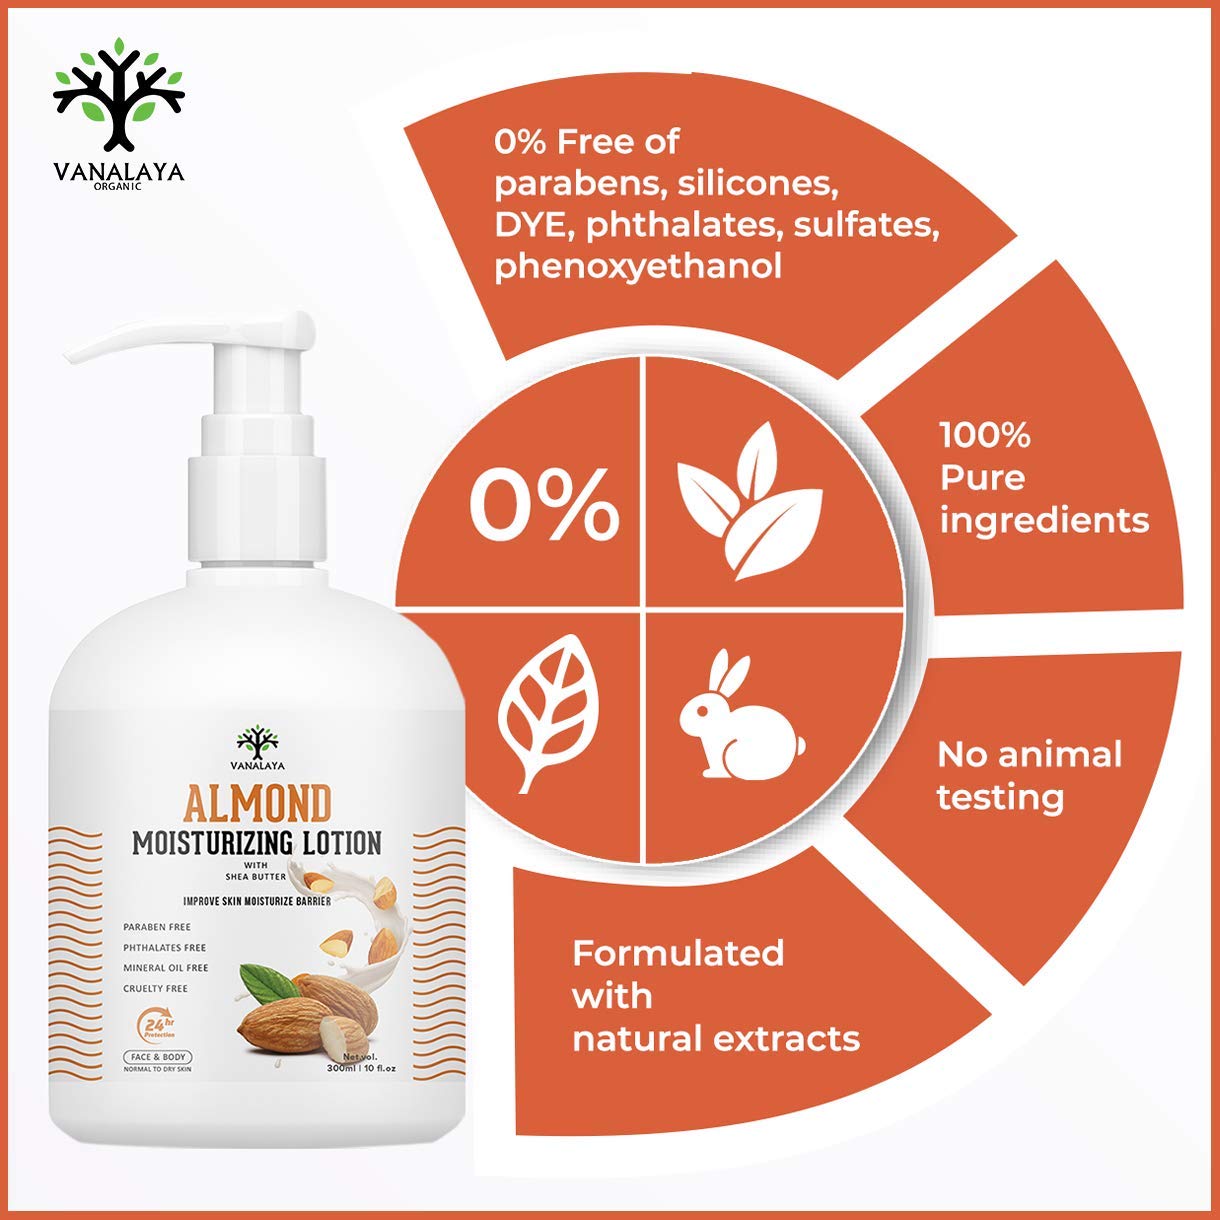 Picture of Vanalaya Almond Moisturizing Lotion with shea butter Vitamin E and coconut oil Paraben Free Sulphate free Mineral oil free for Face and Body 10 FL Oz - 300 ML